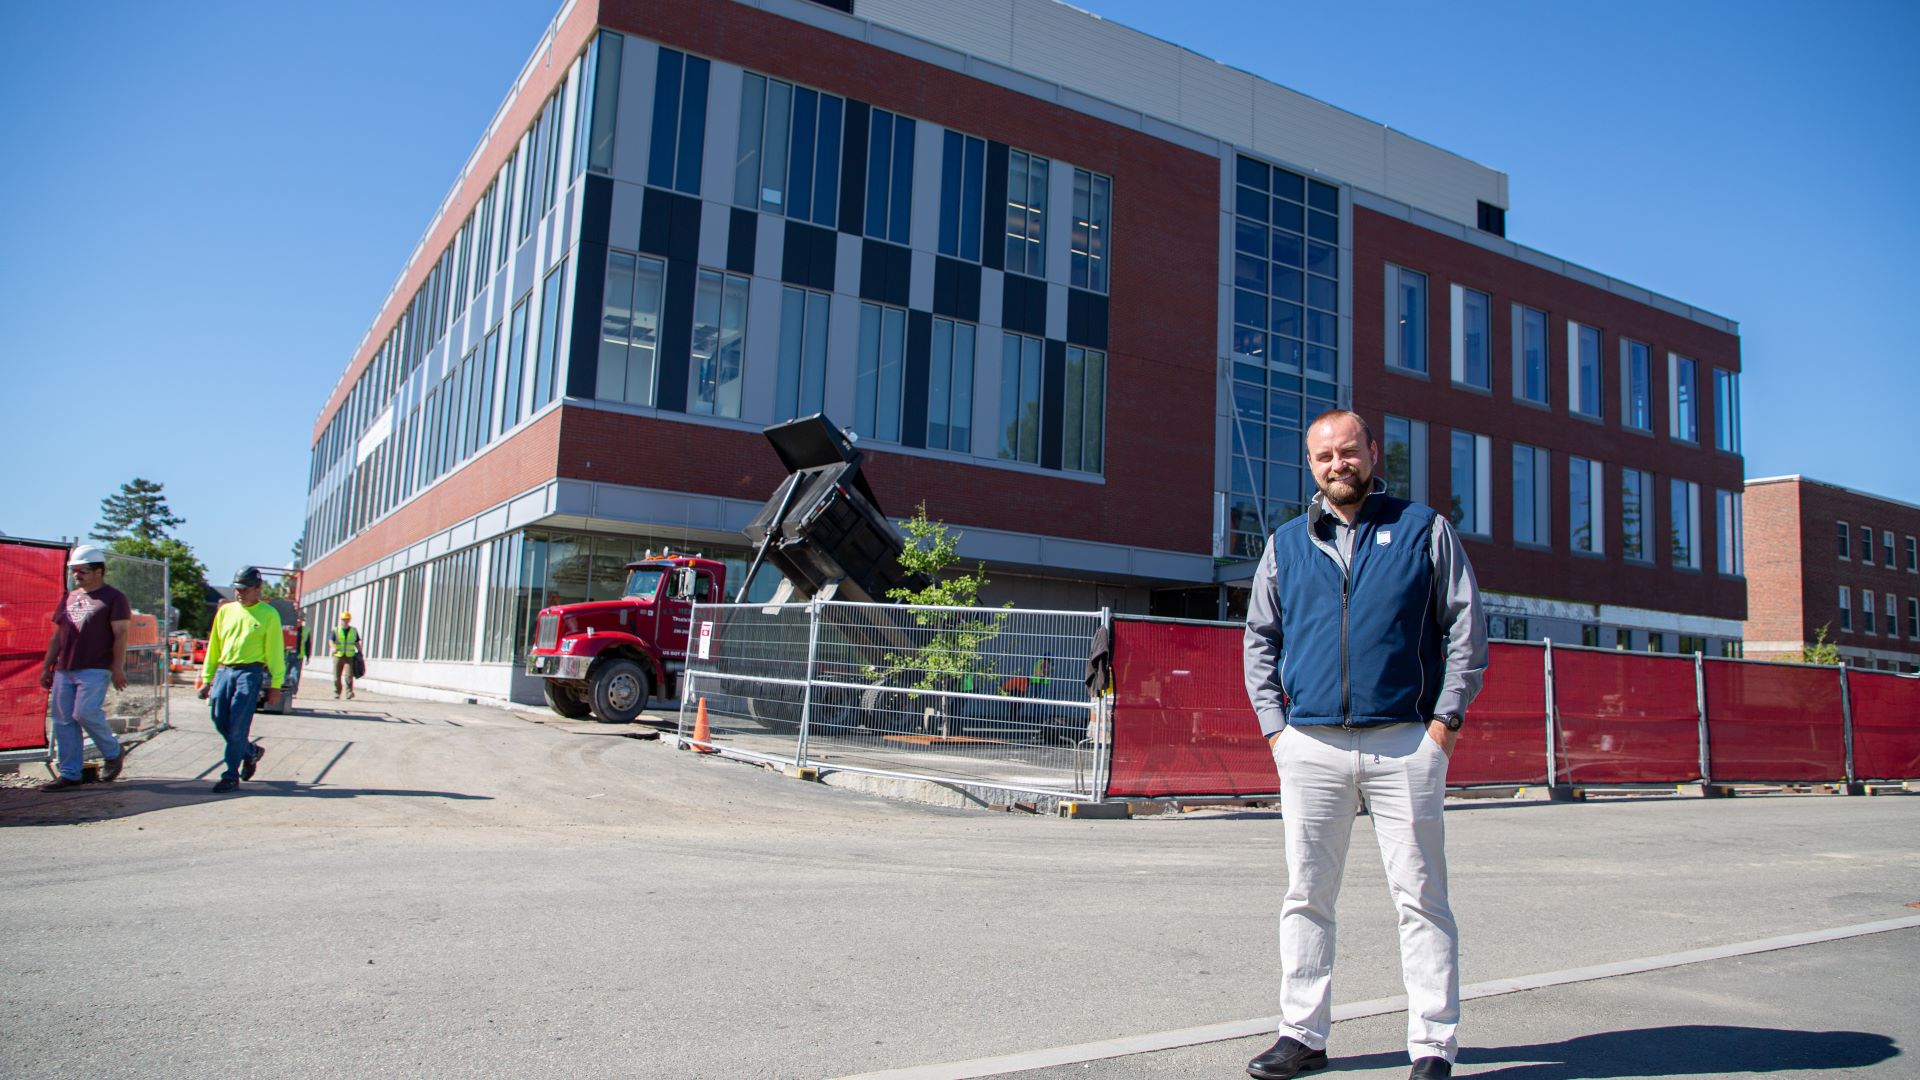 Chris Richards stands in front of the new engineering building at the University of Maine.